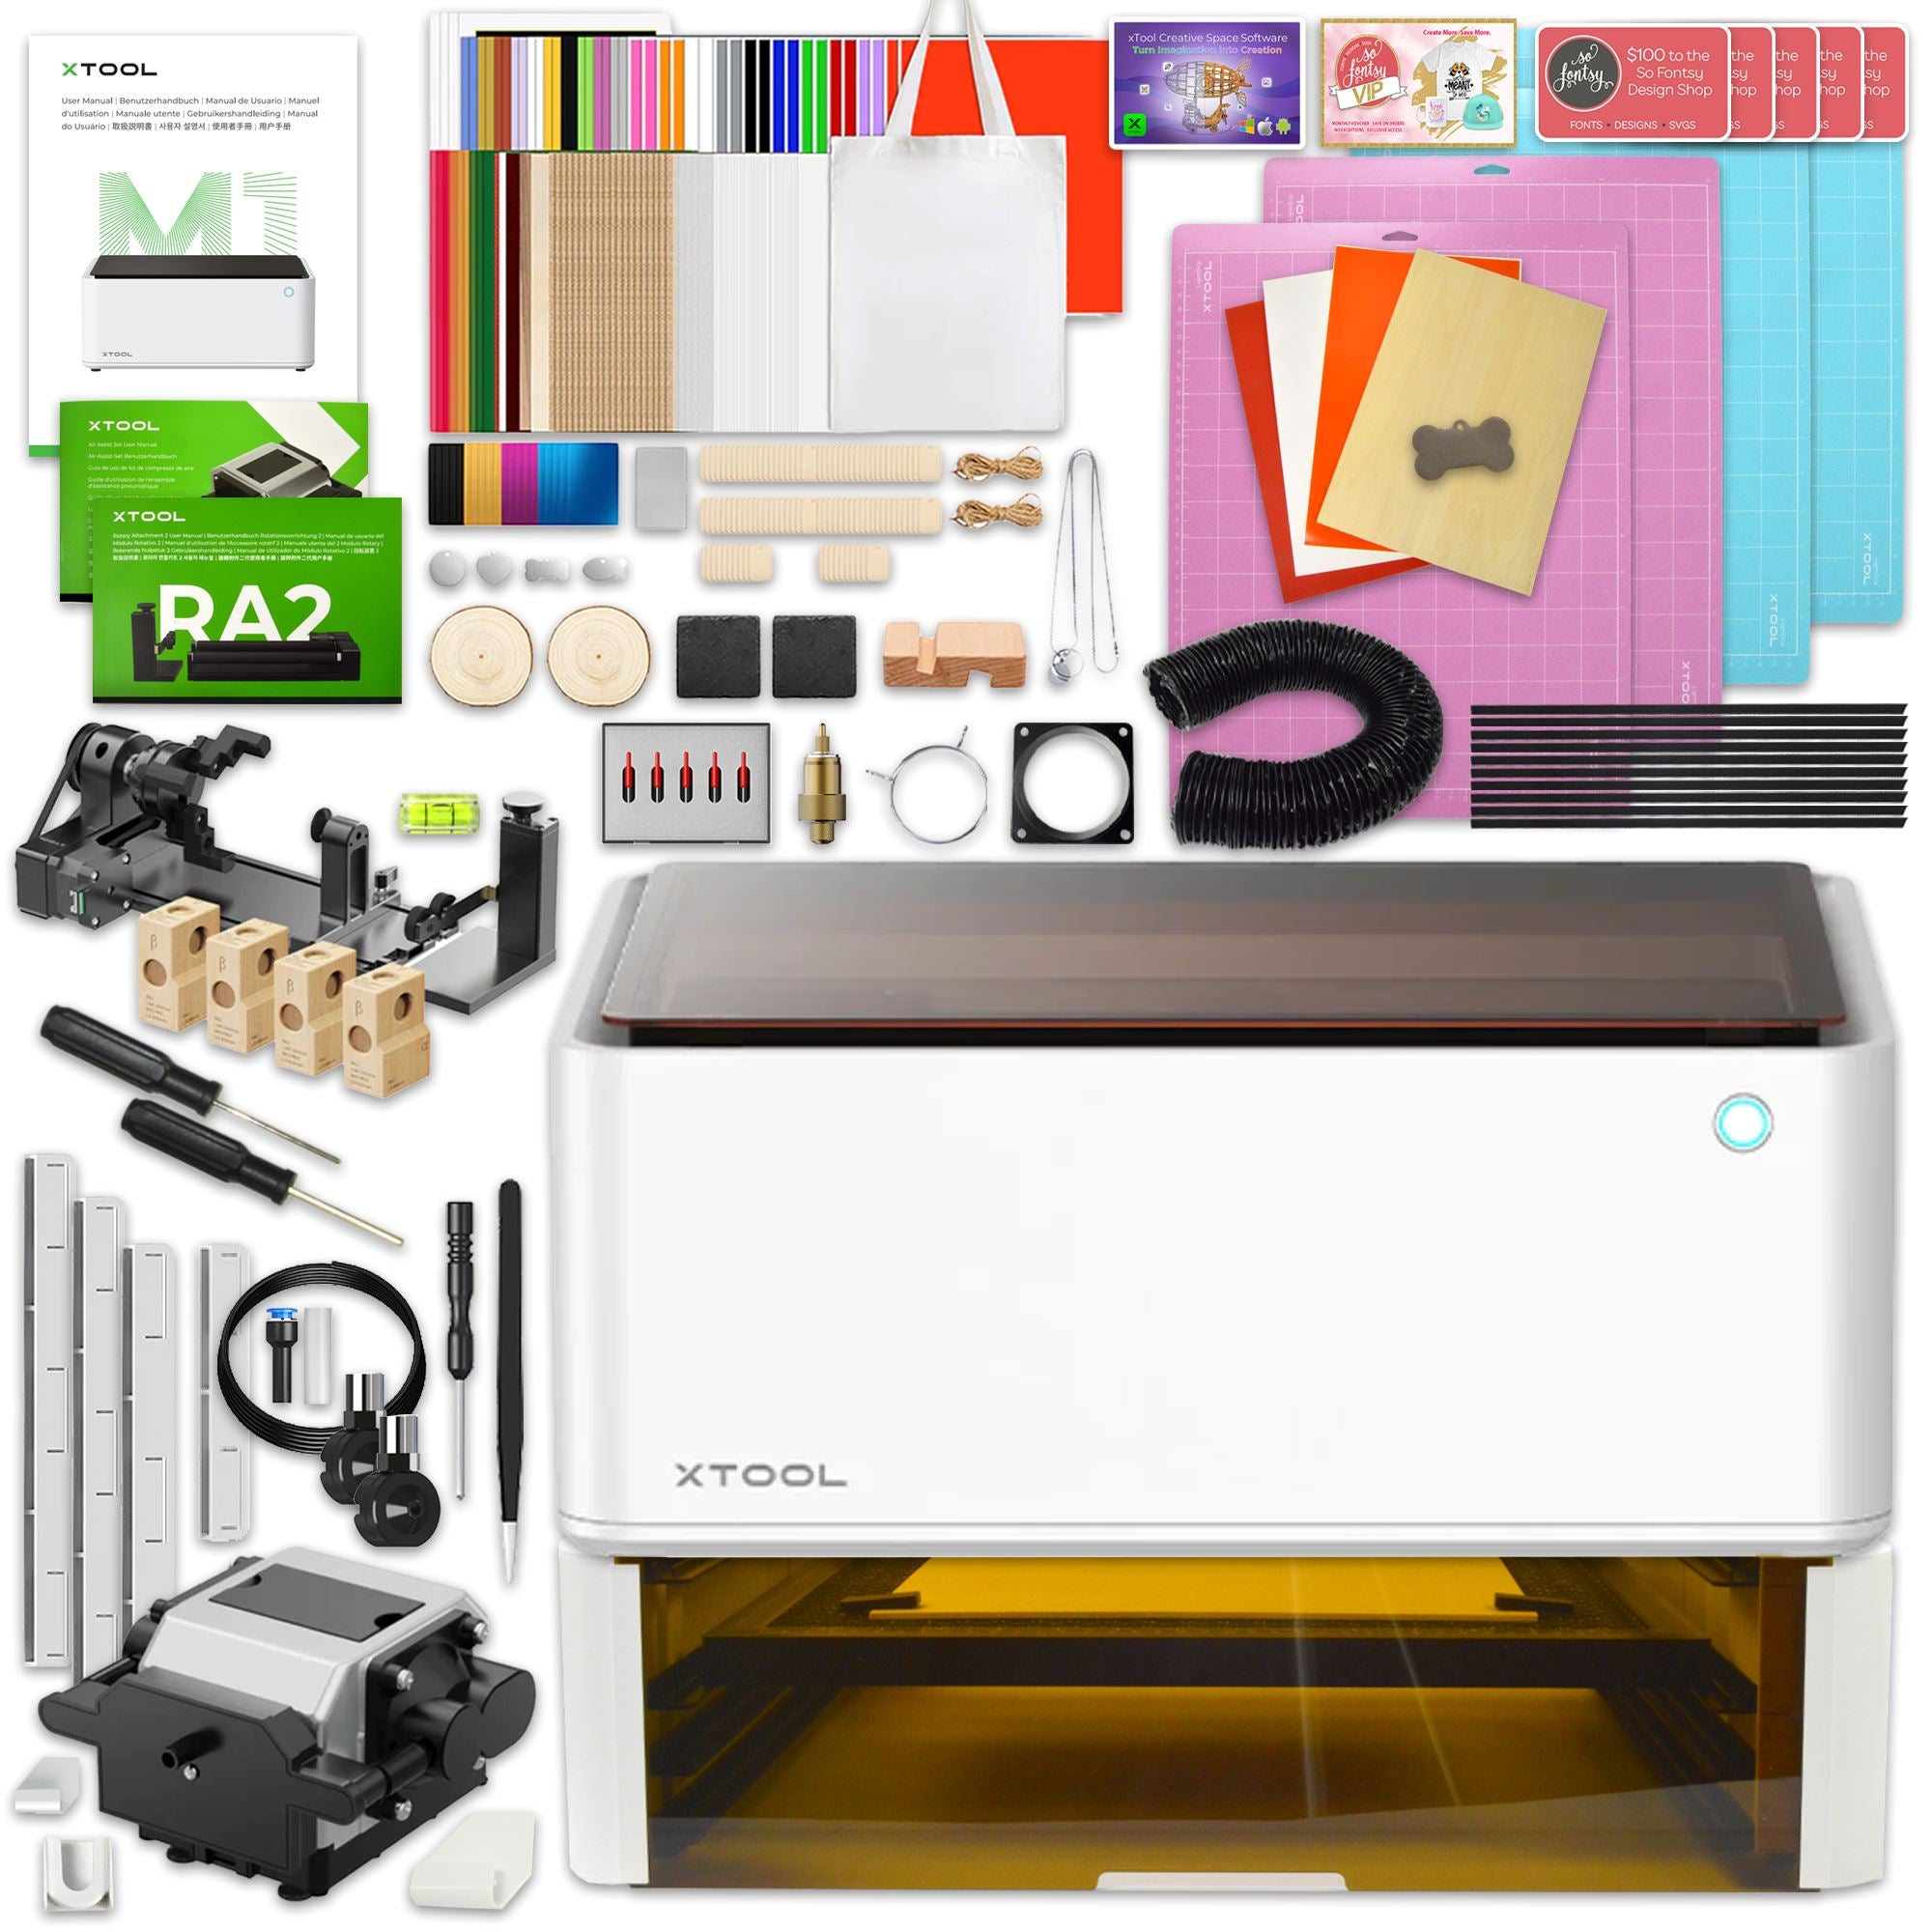 xTool M1 10w Laser Engraver 3-in-1 Laser Engraving Cutting Machine (Please  check the bundle for more options)